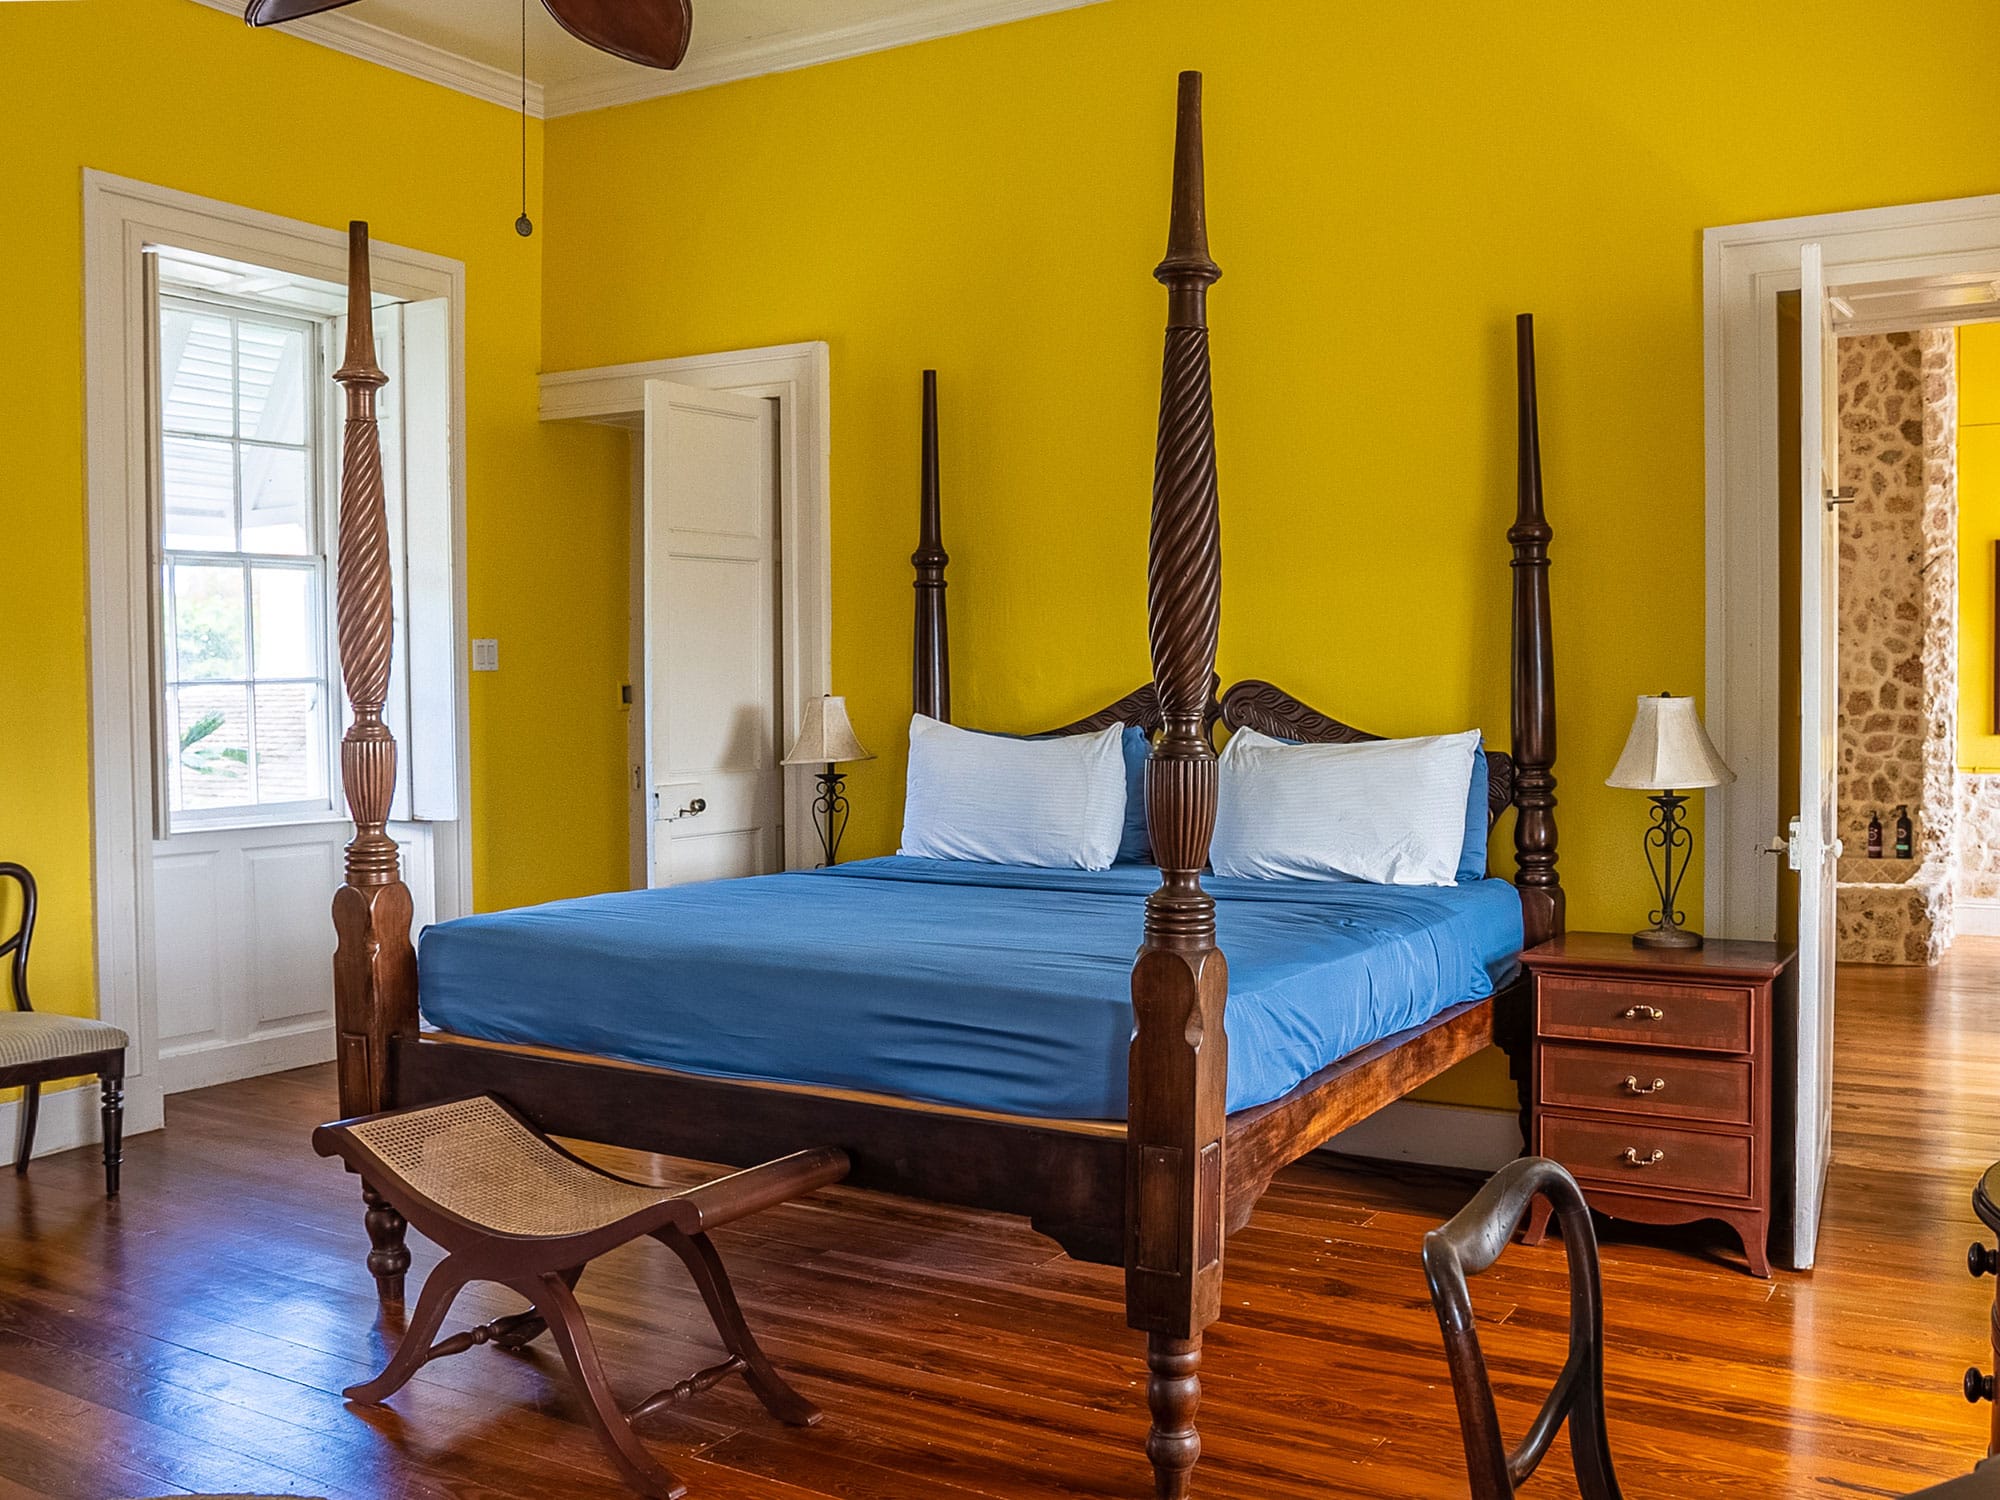 An interior bedroom view of the Clifton Hall Great House on the Caribbean island of Barbados.